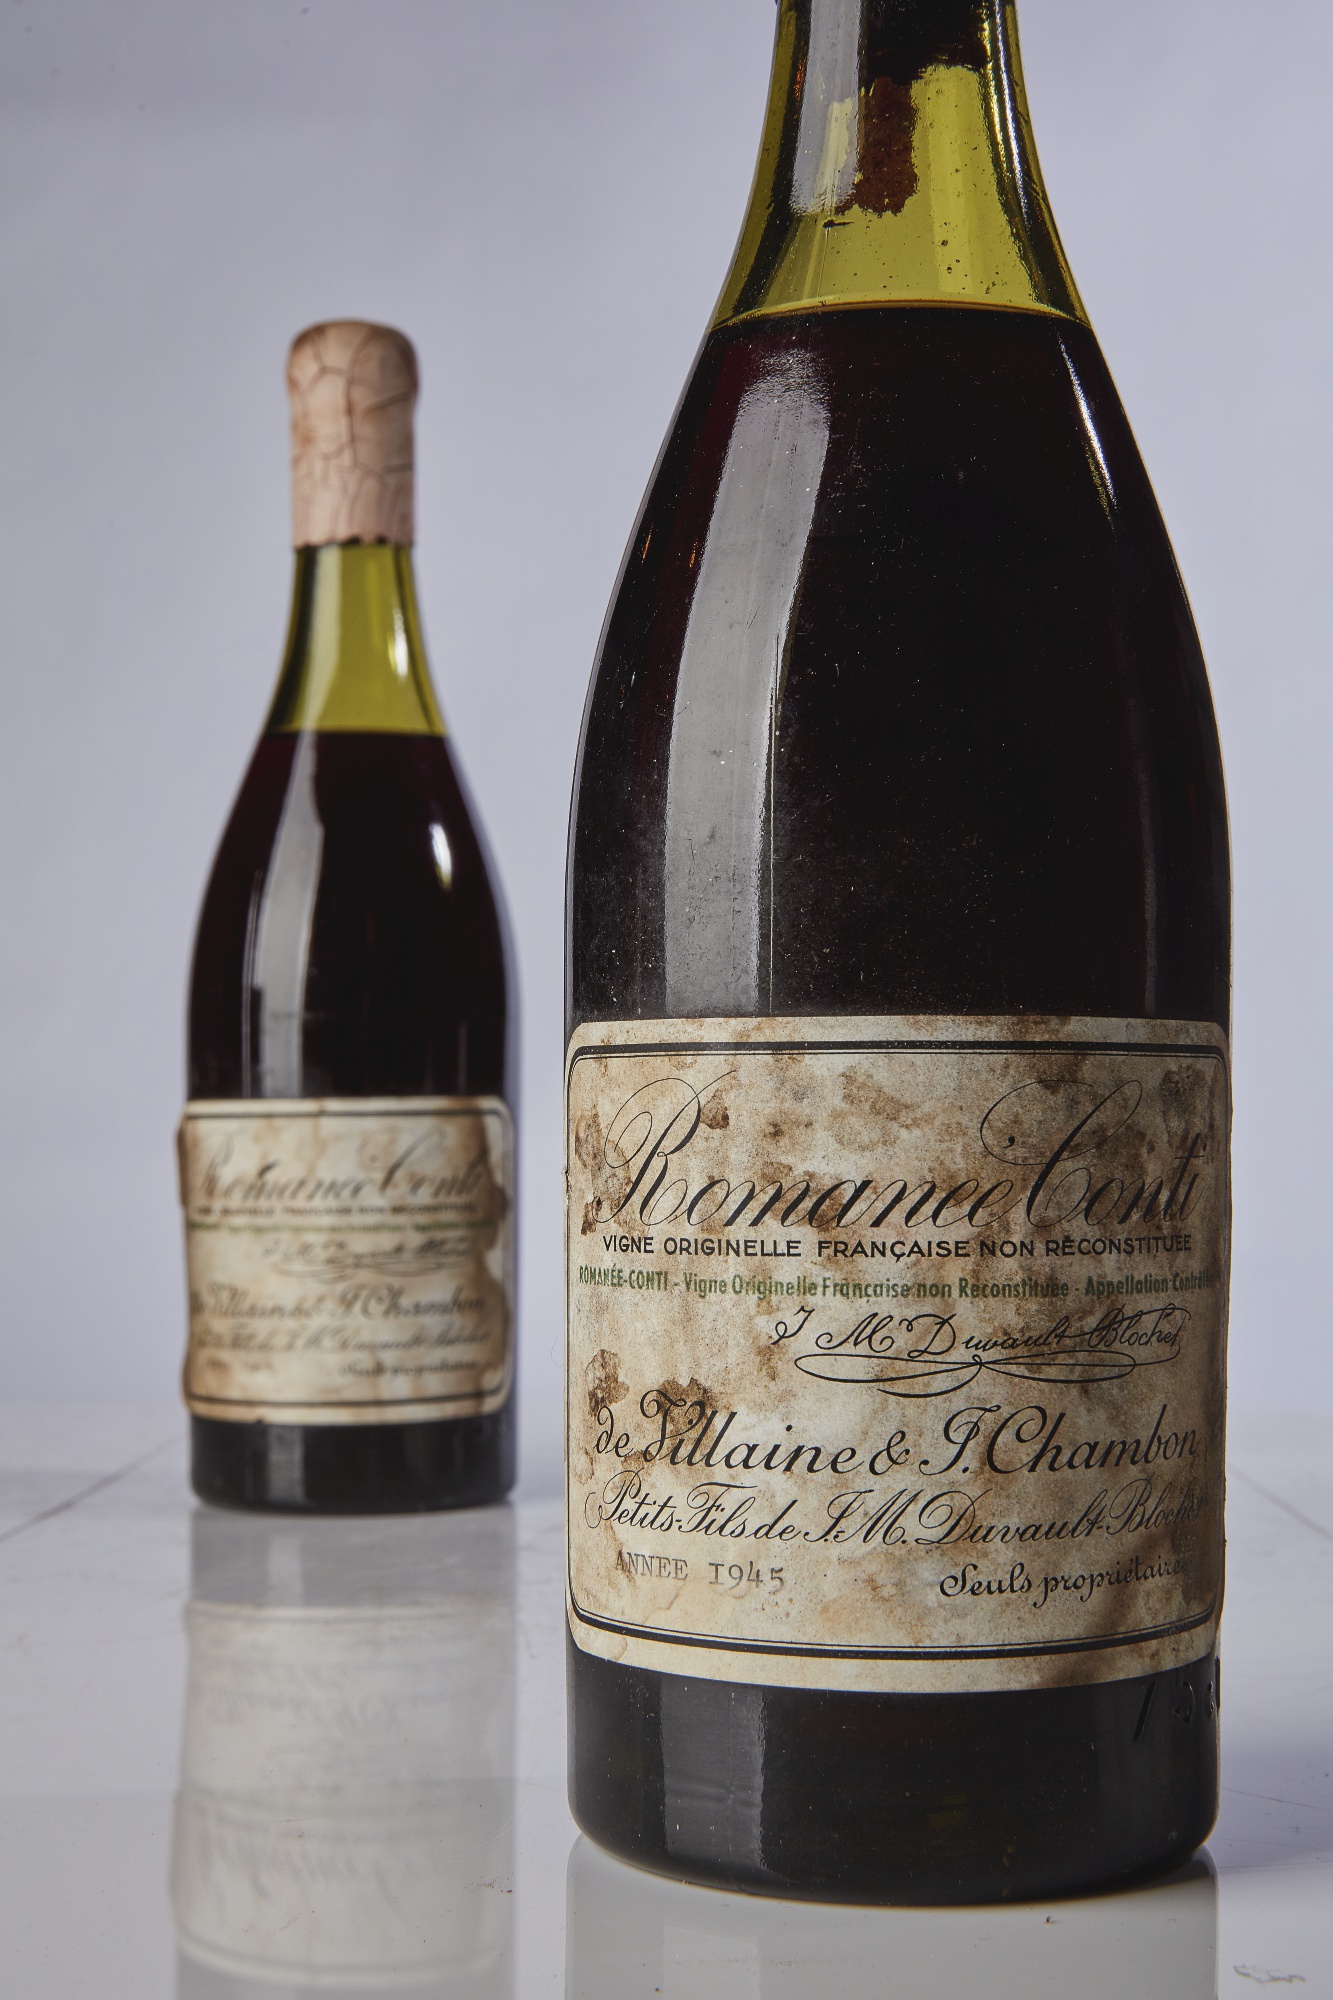 Most Expensive Bottle Wine: 1945 Romanee-Conti Burgundy Auction - Bloomberg